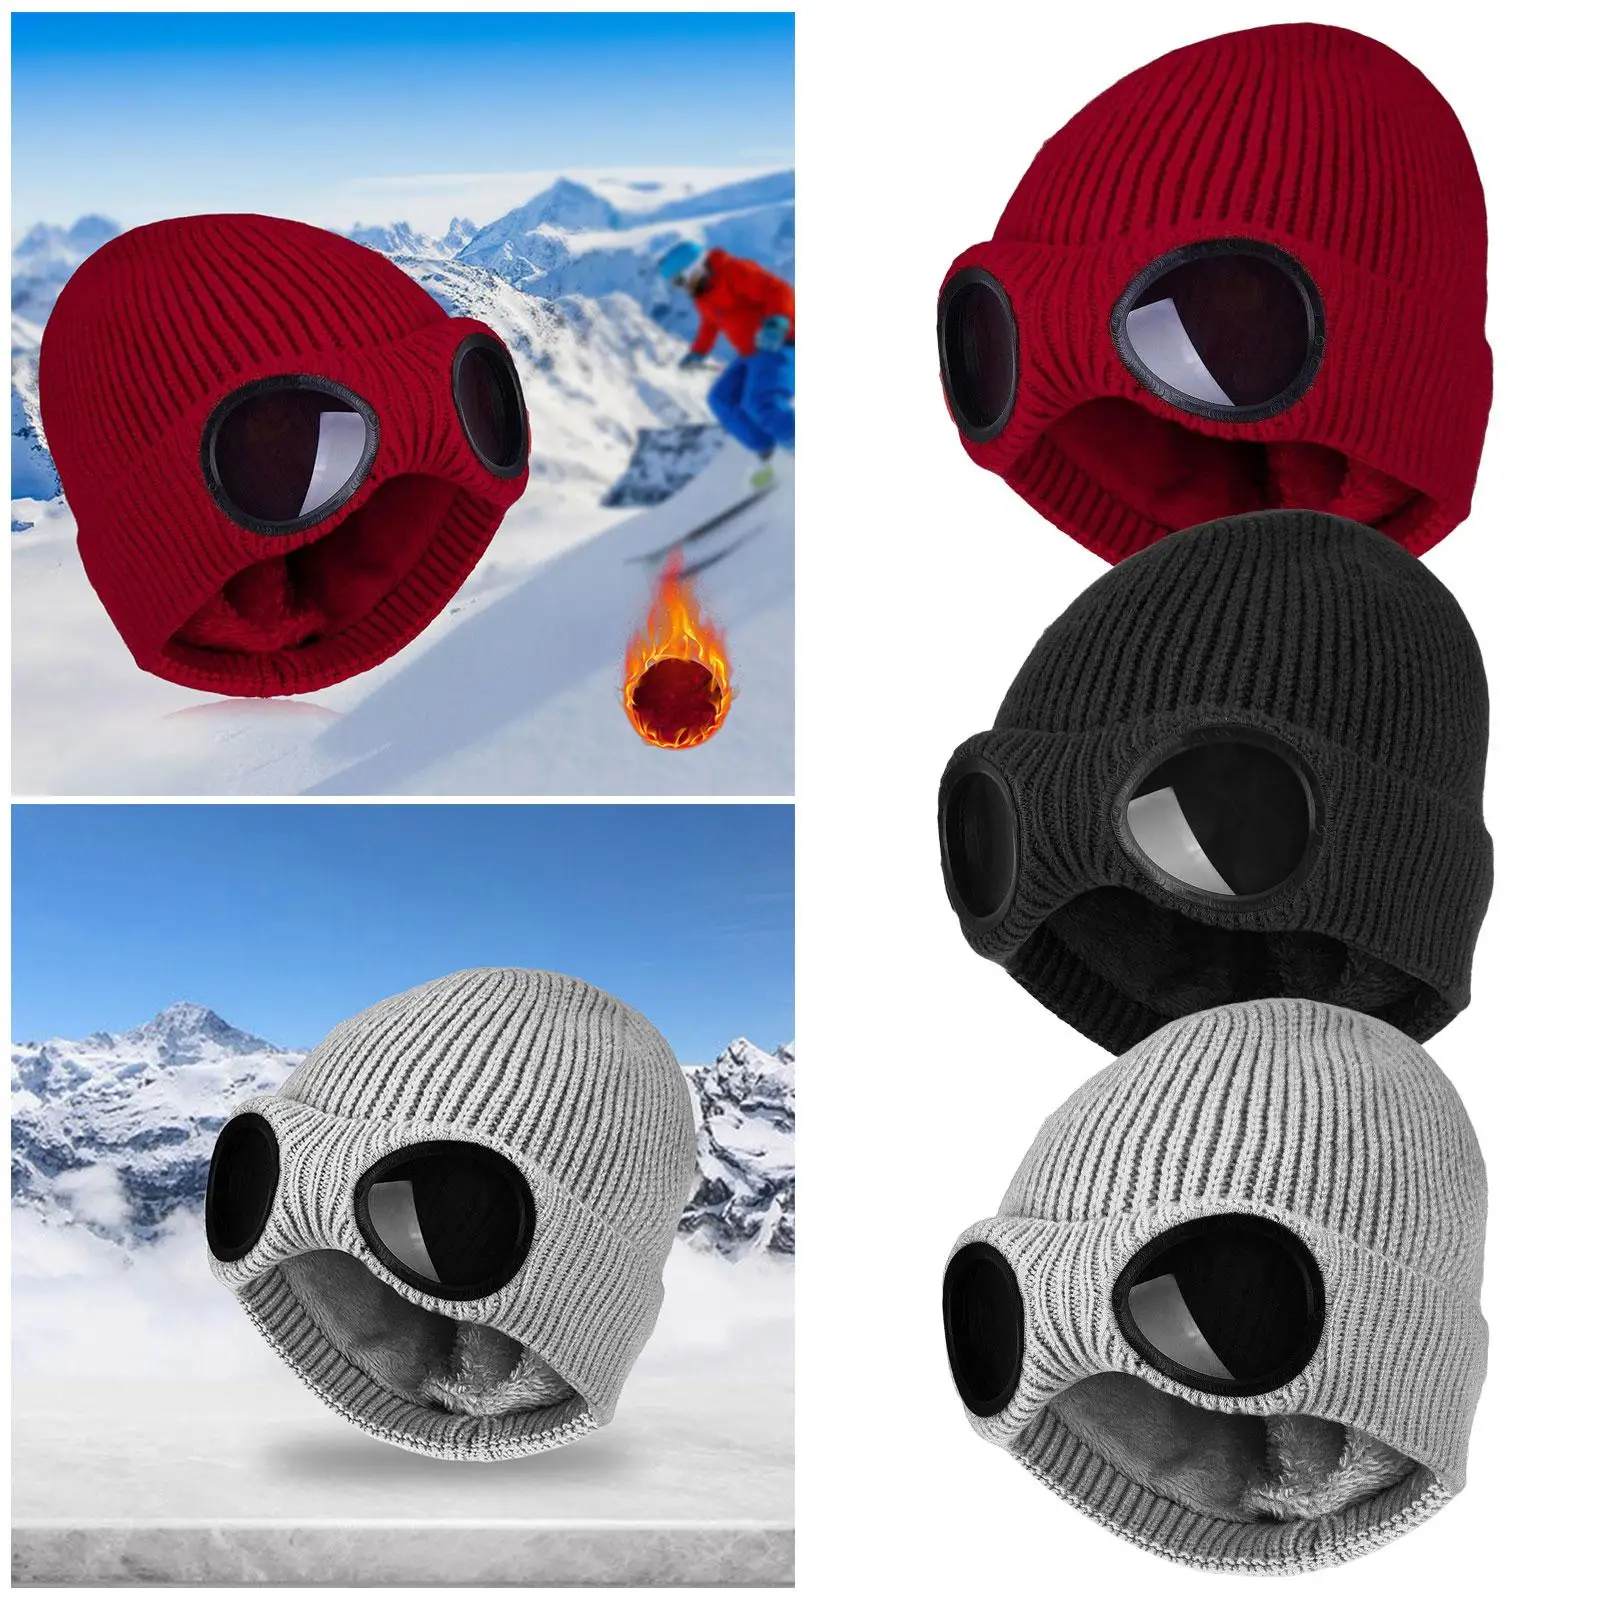 Winter Warm Knit Hats Plush Thermal Windproof Soft Multi-Function Caps Headgear Ski Caps for Men Women Adult Cycling Running